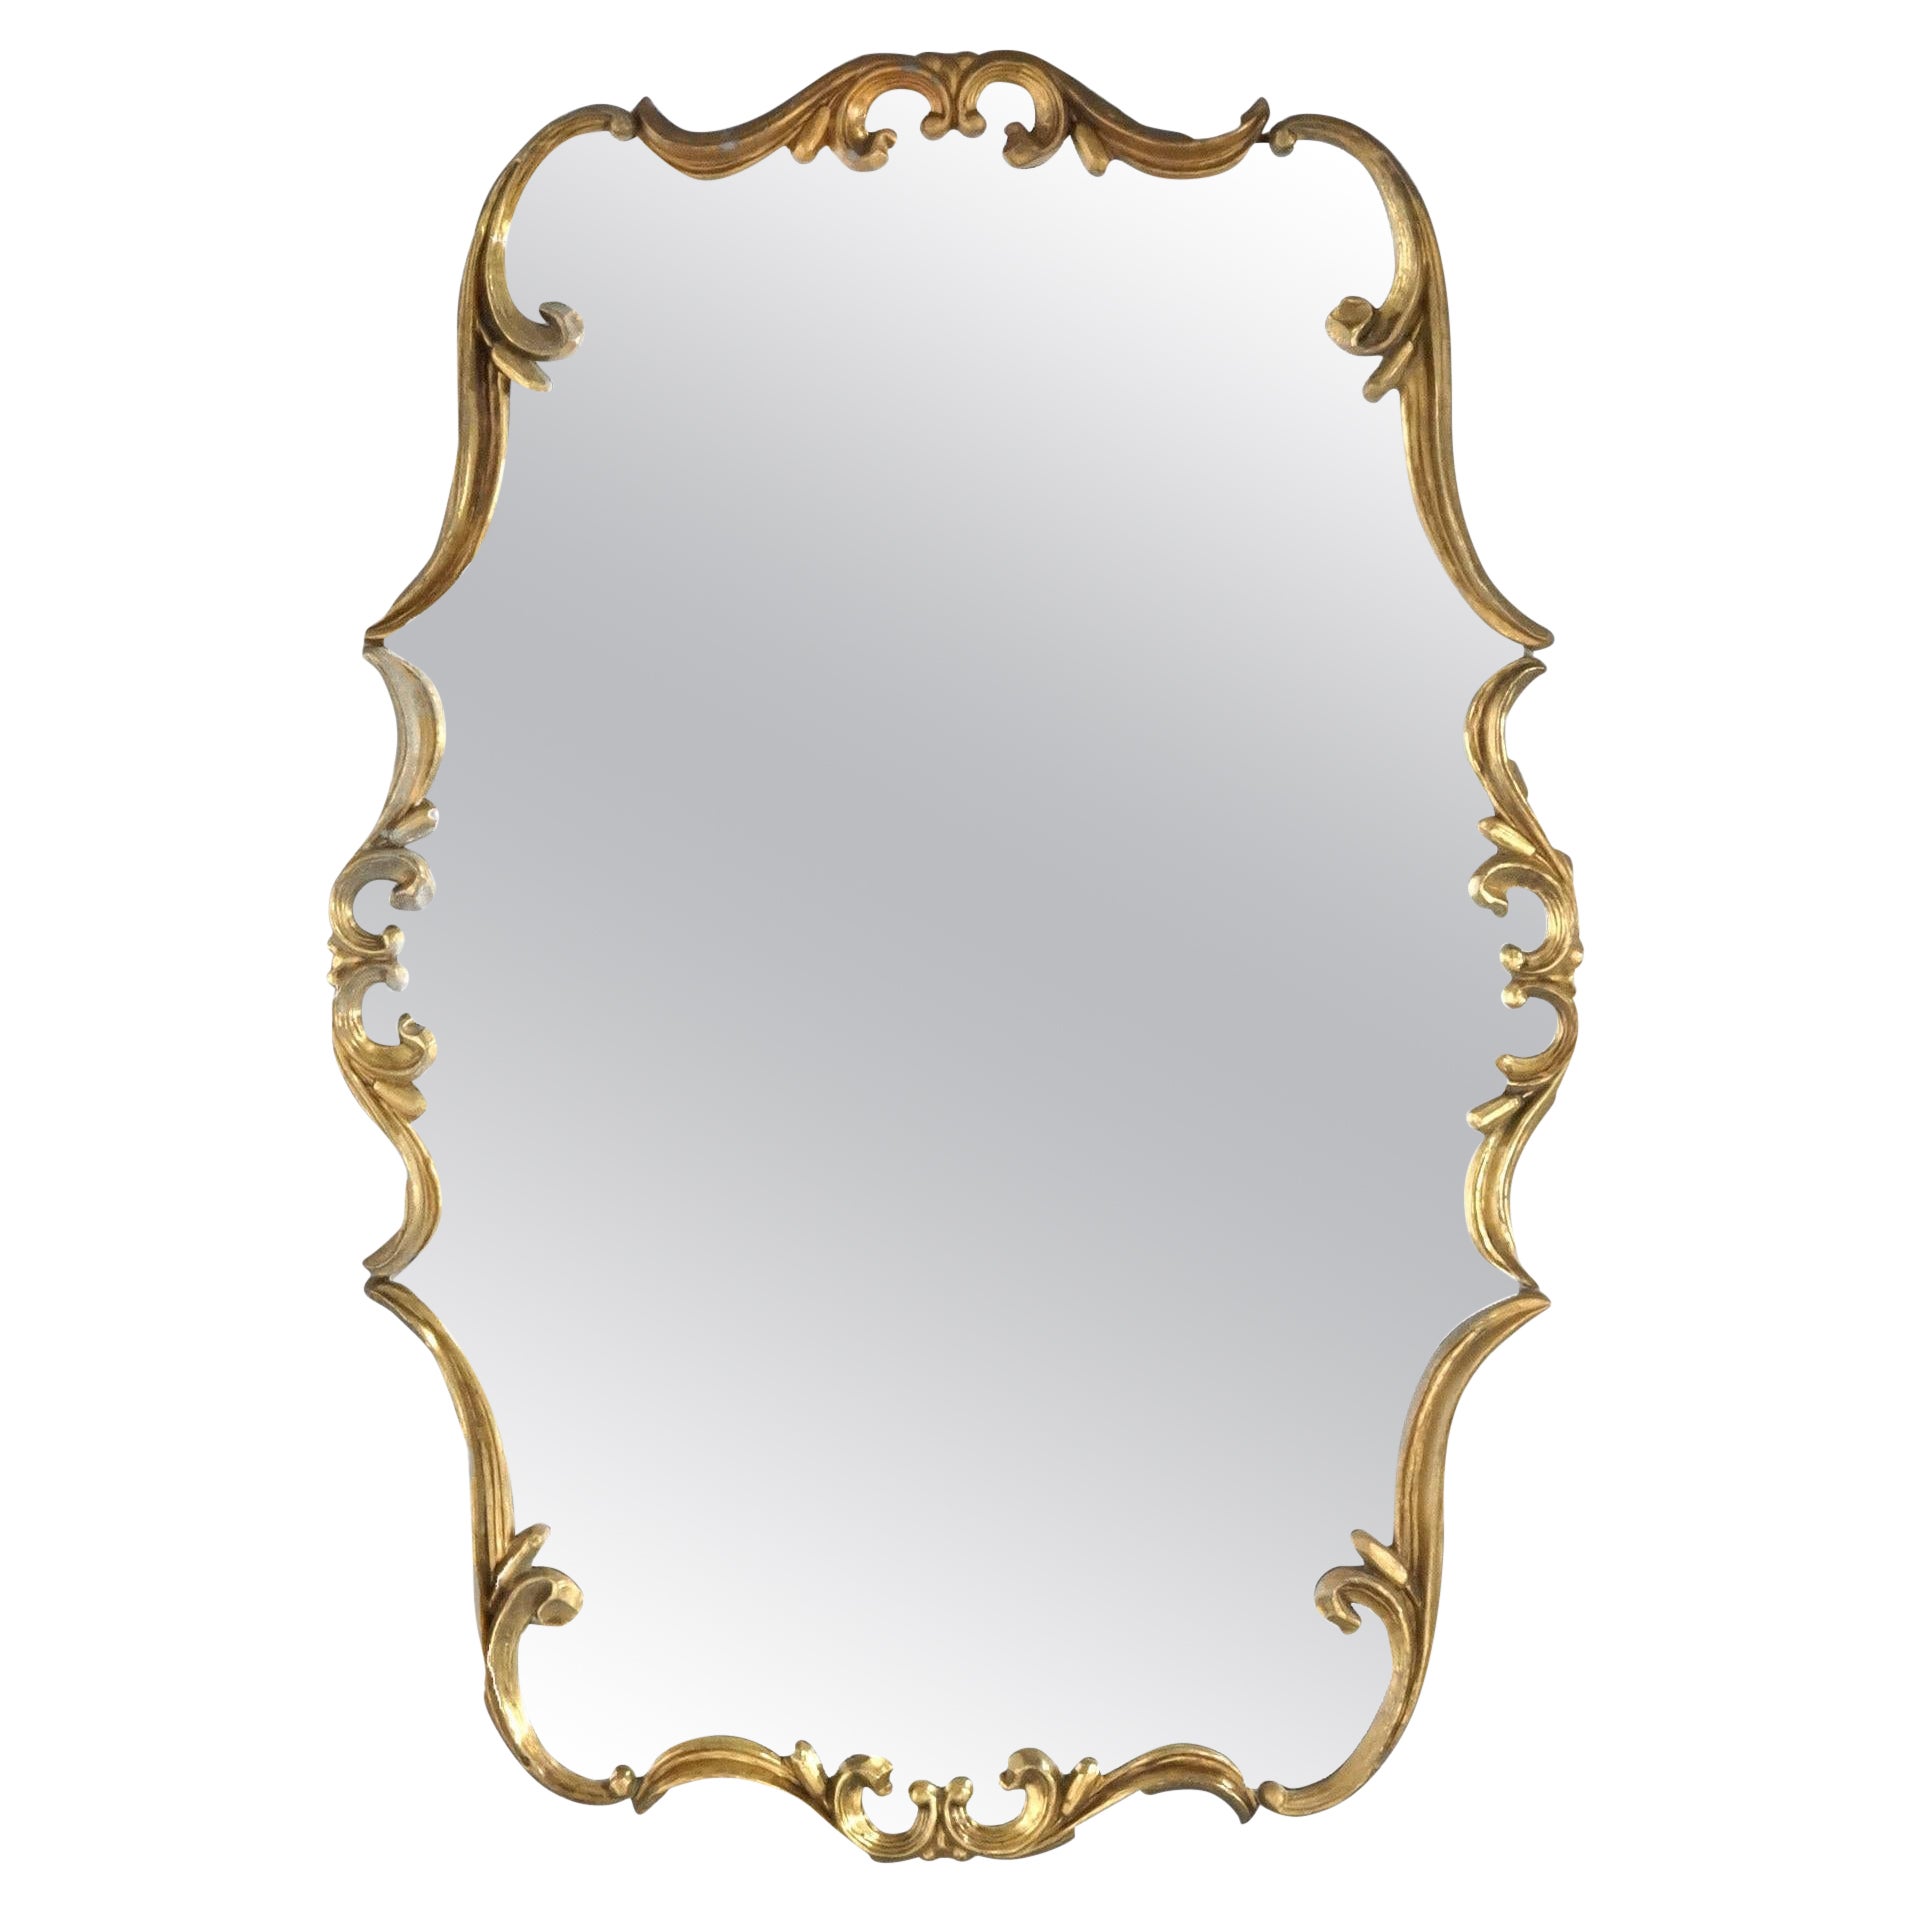 Antique French Empire Style Bronzed Metal Scroll Form Wall Mirror, 1920 For Sale